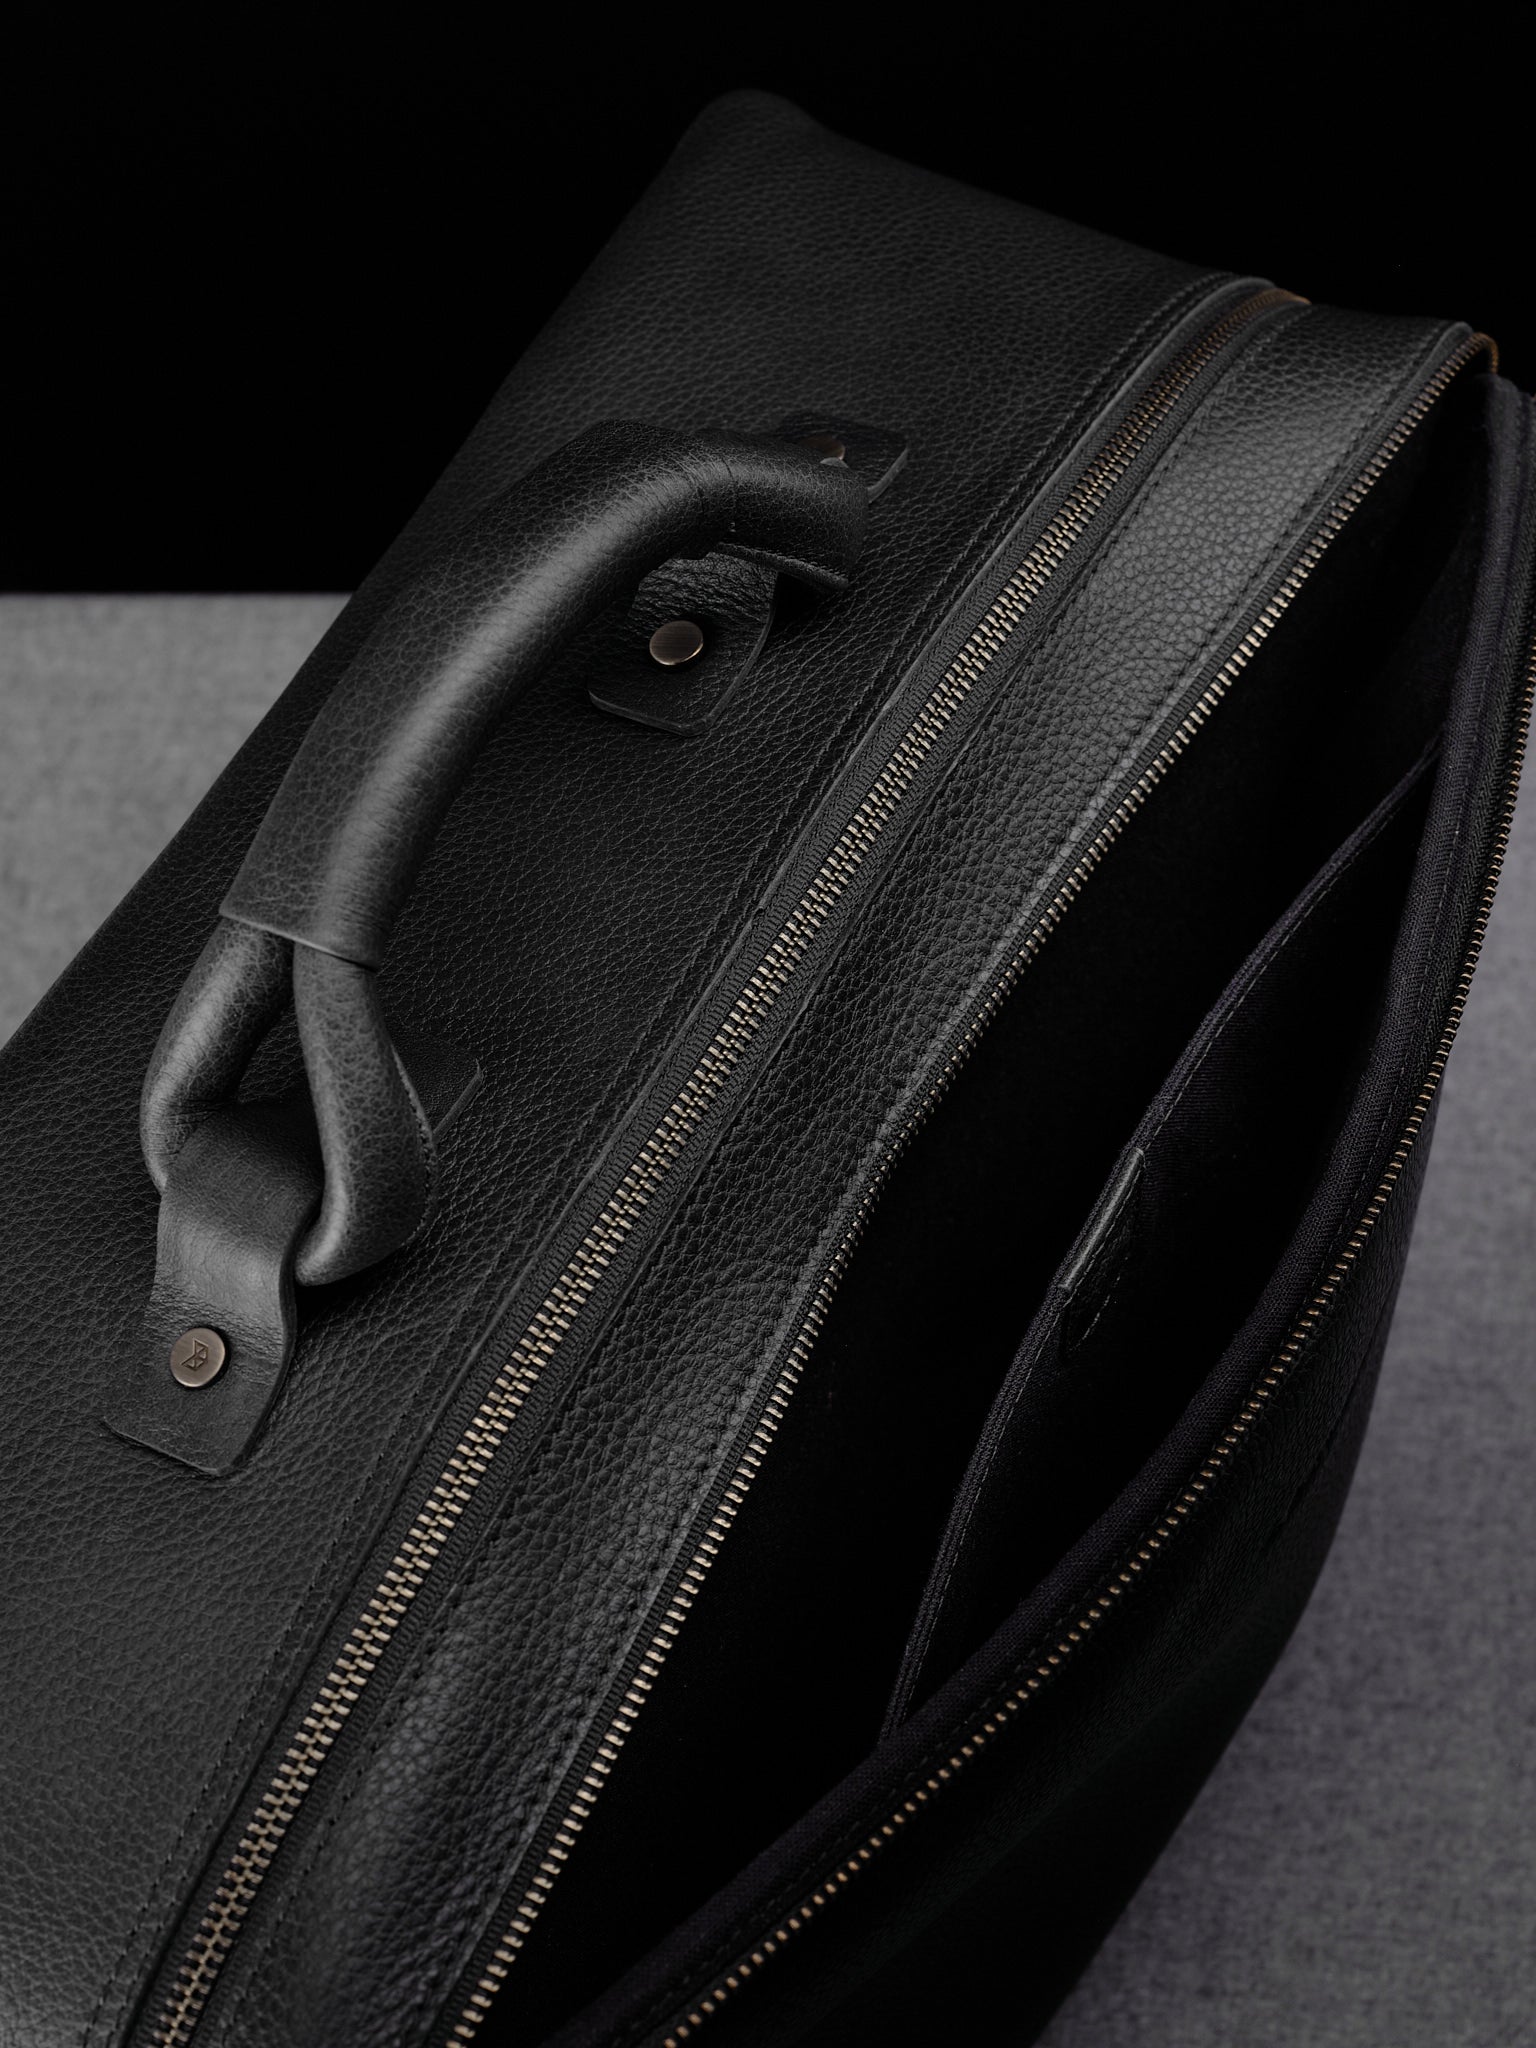 Dedicated Laptop Compartment. Mens Leather Duffle Bag Black by Capra Leather